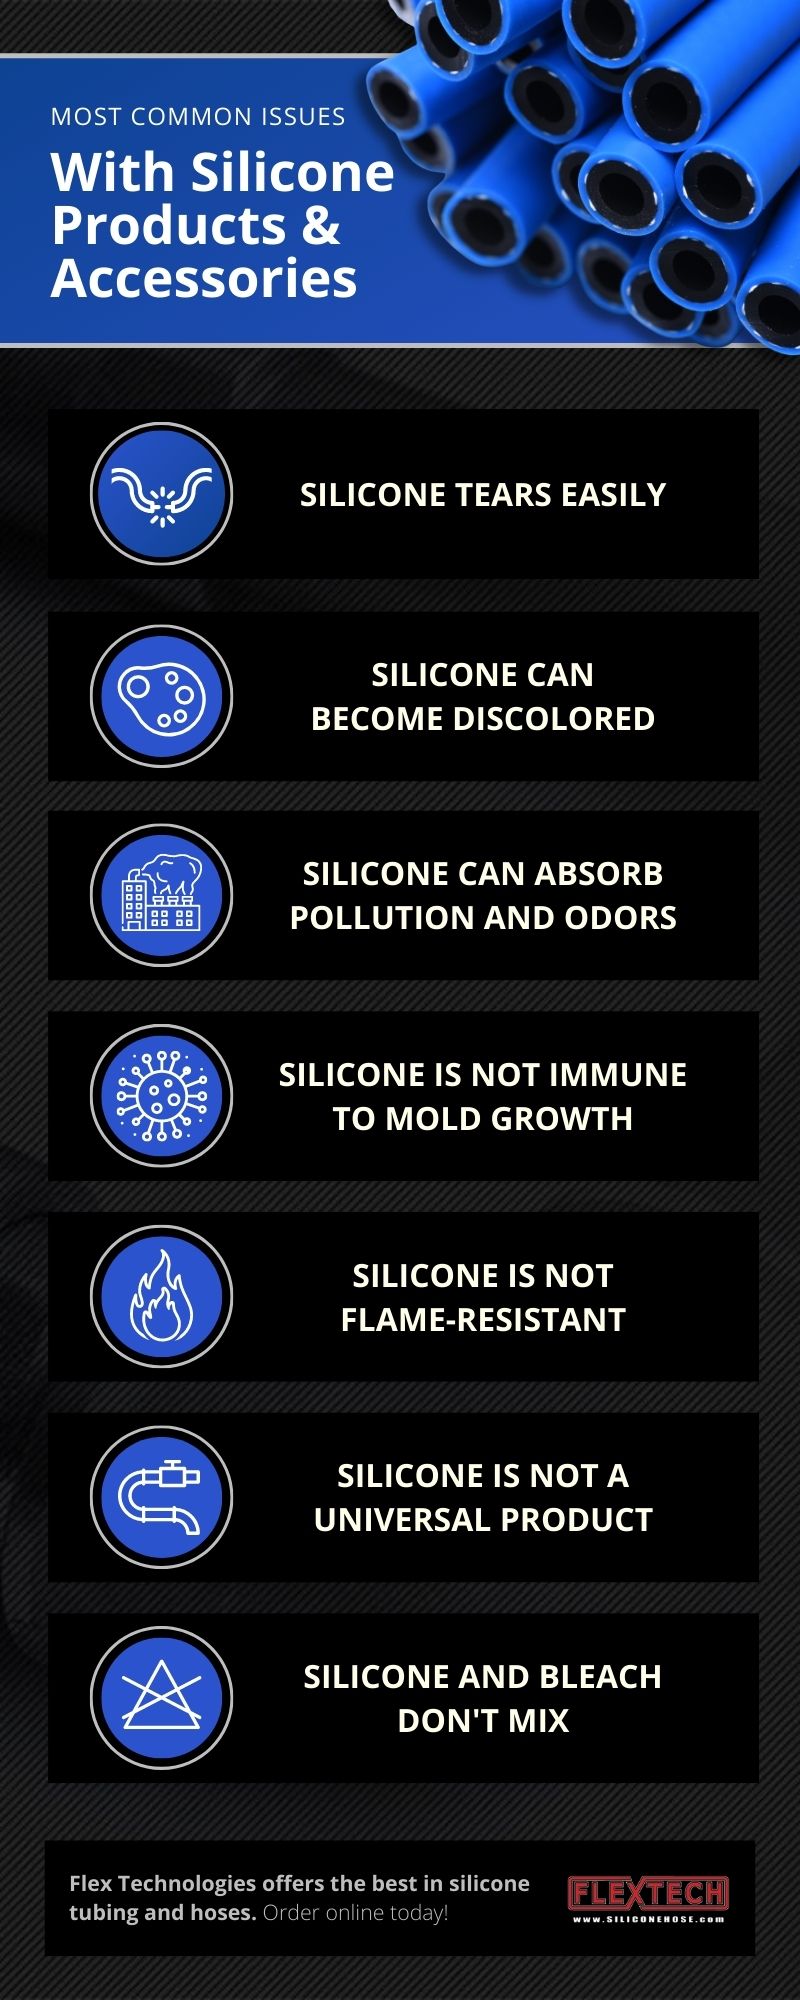 Most Common Issues With Silicone Products & Accessories Infographic